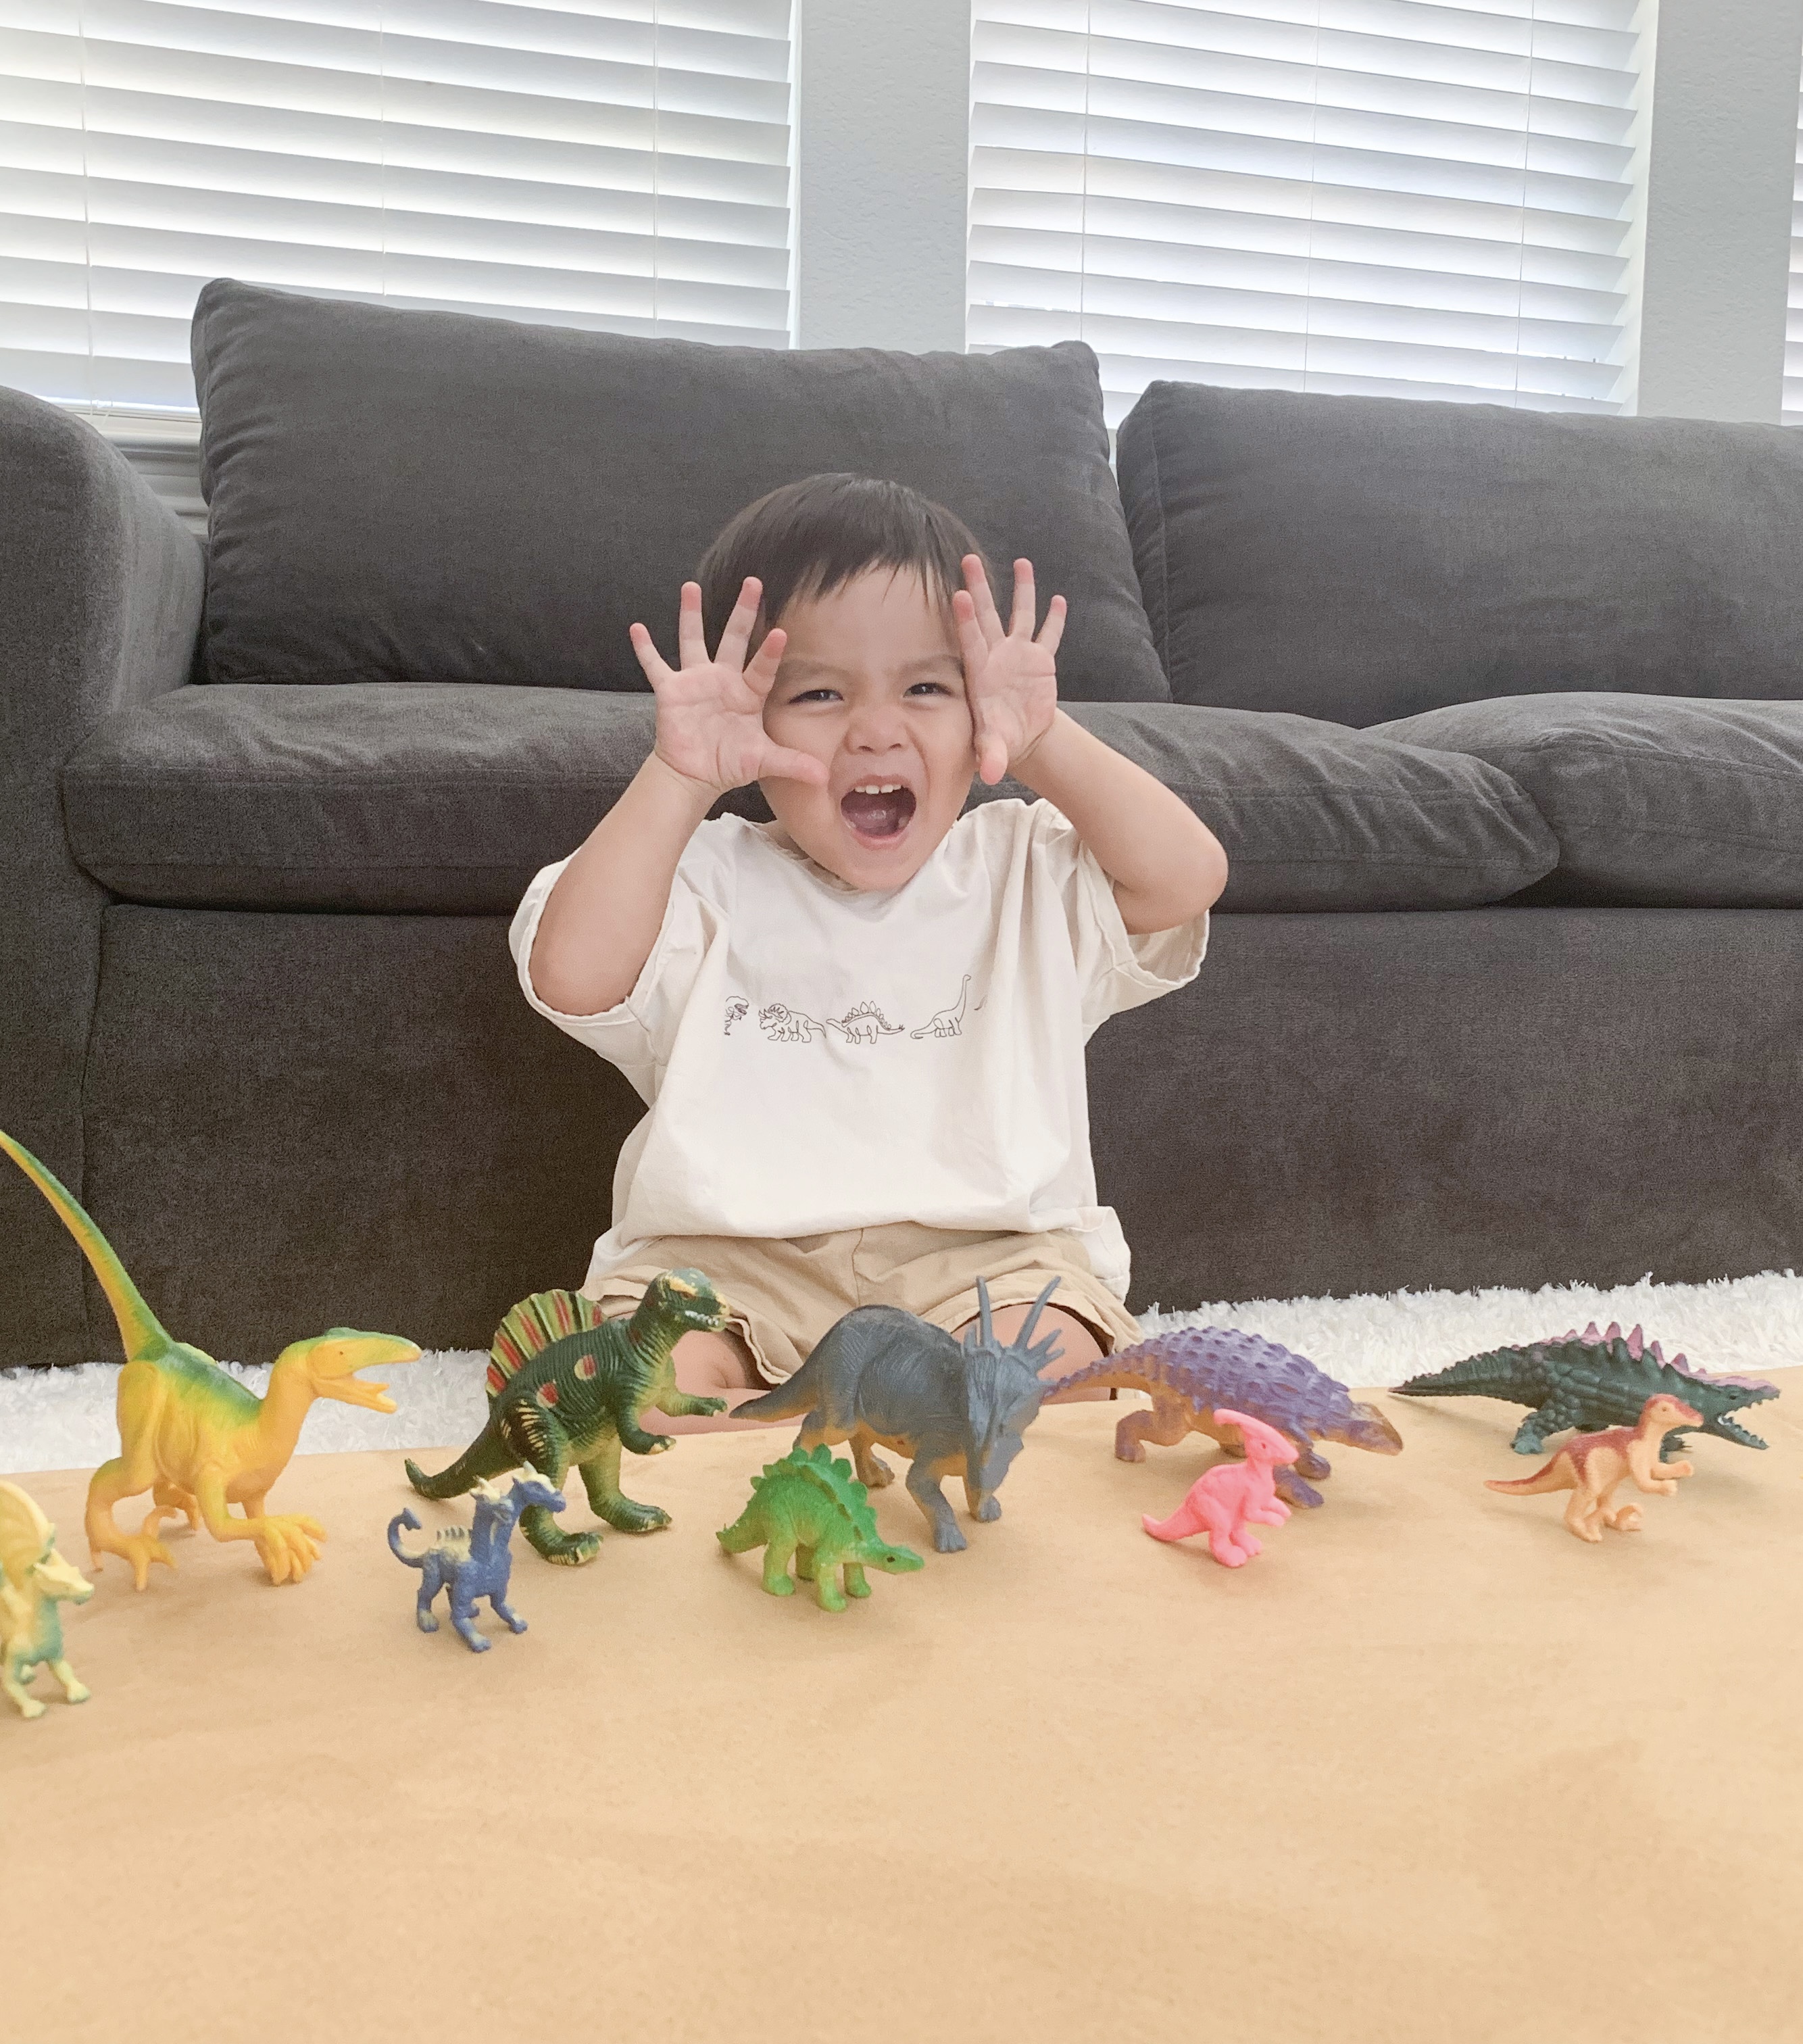 A toddler playing with dino toys and making a face while 